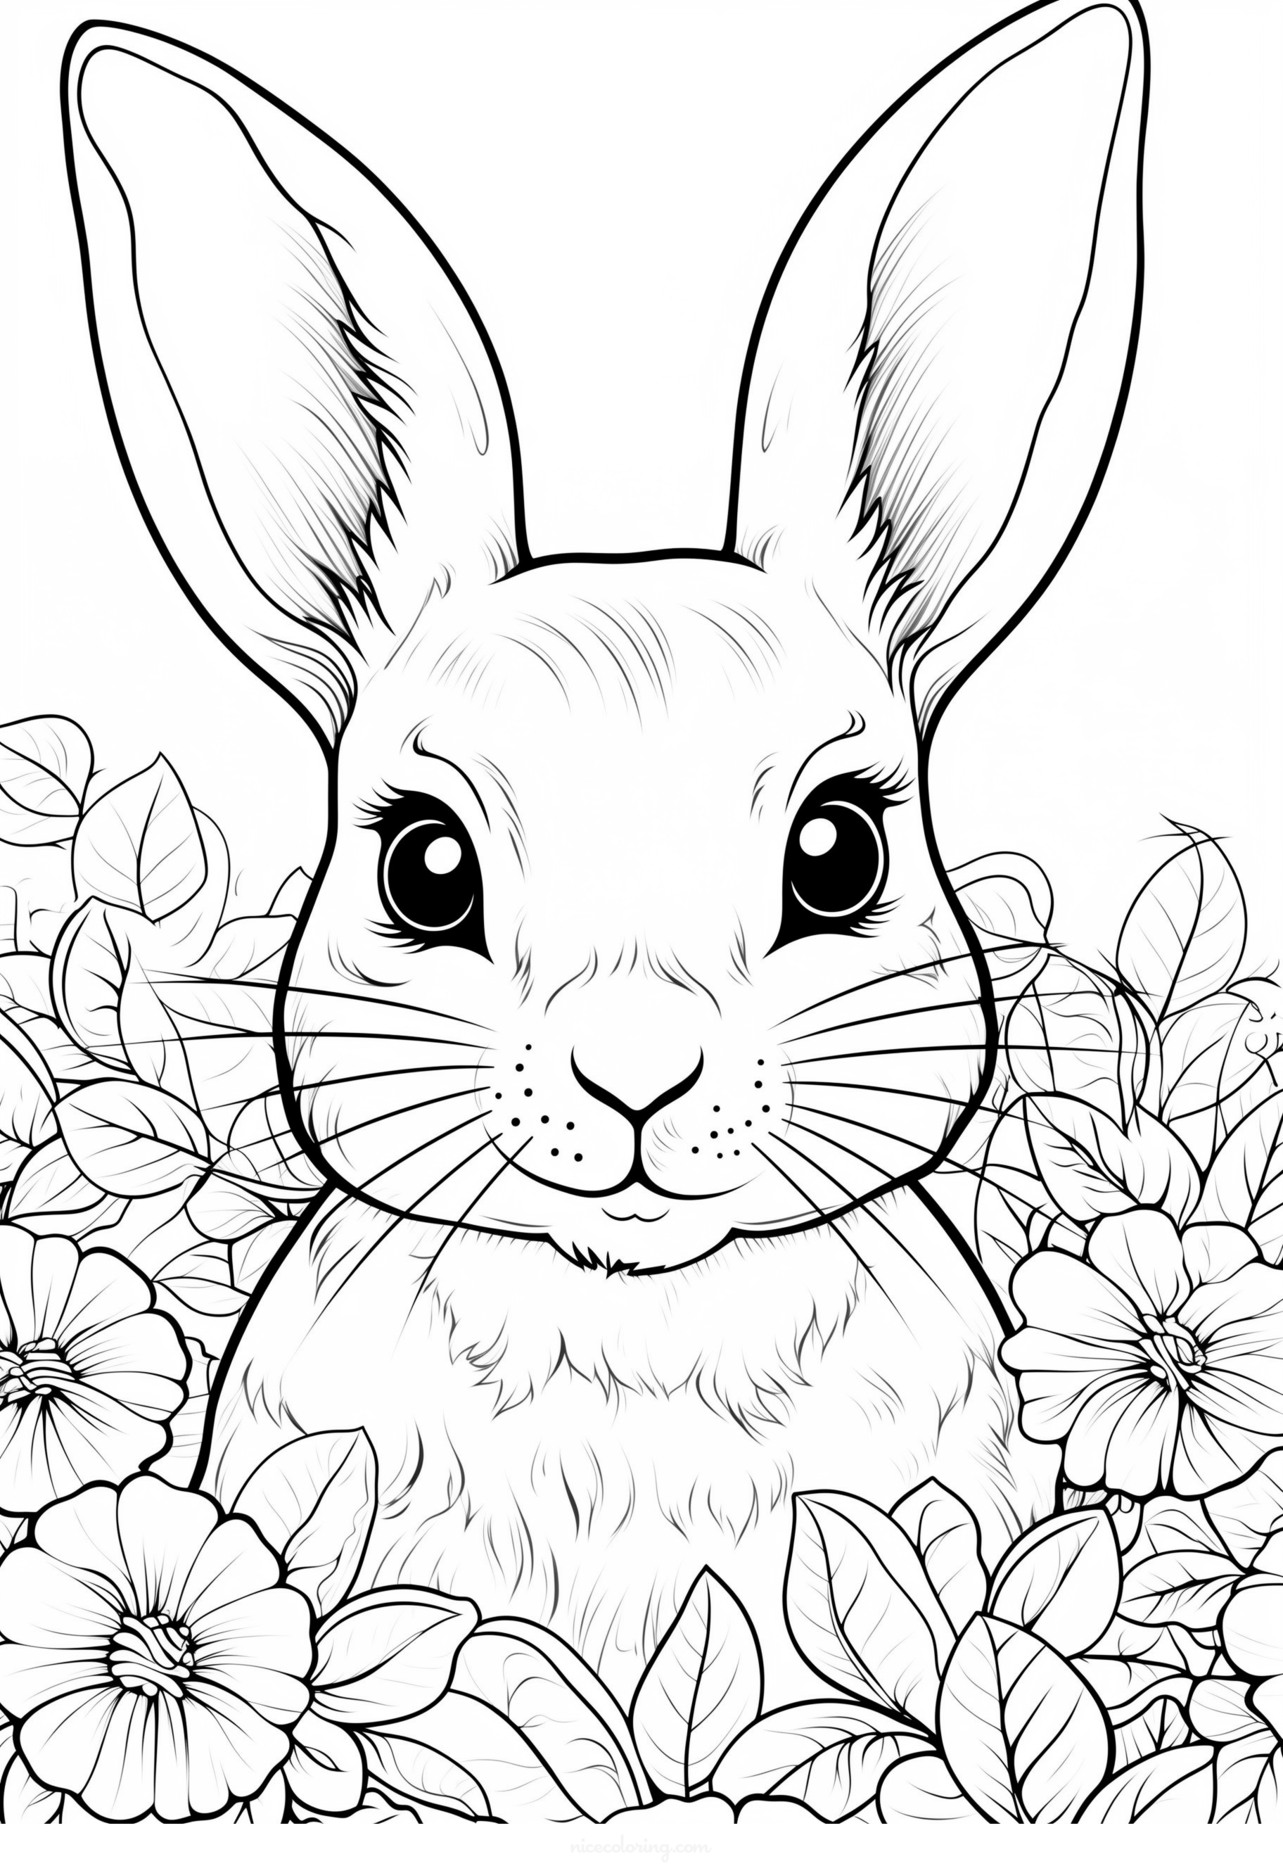 Cute rabbit surrounded by flowers coloring page